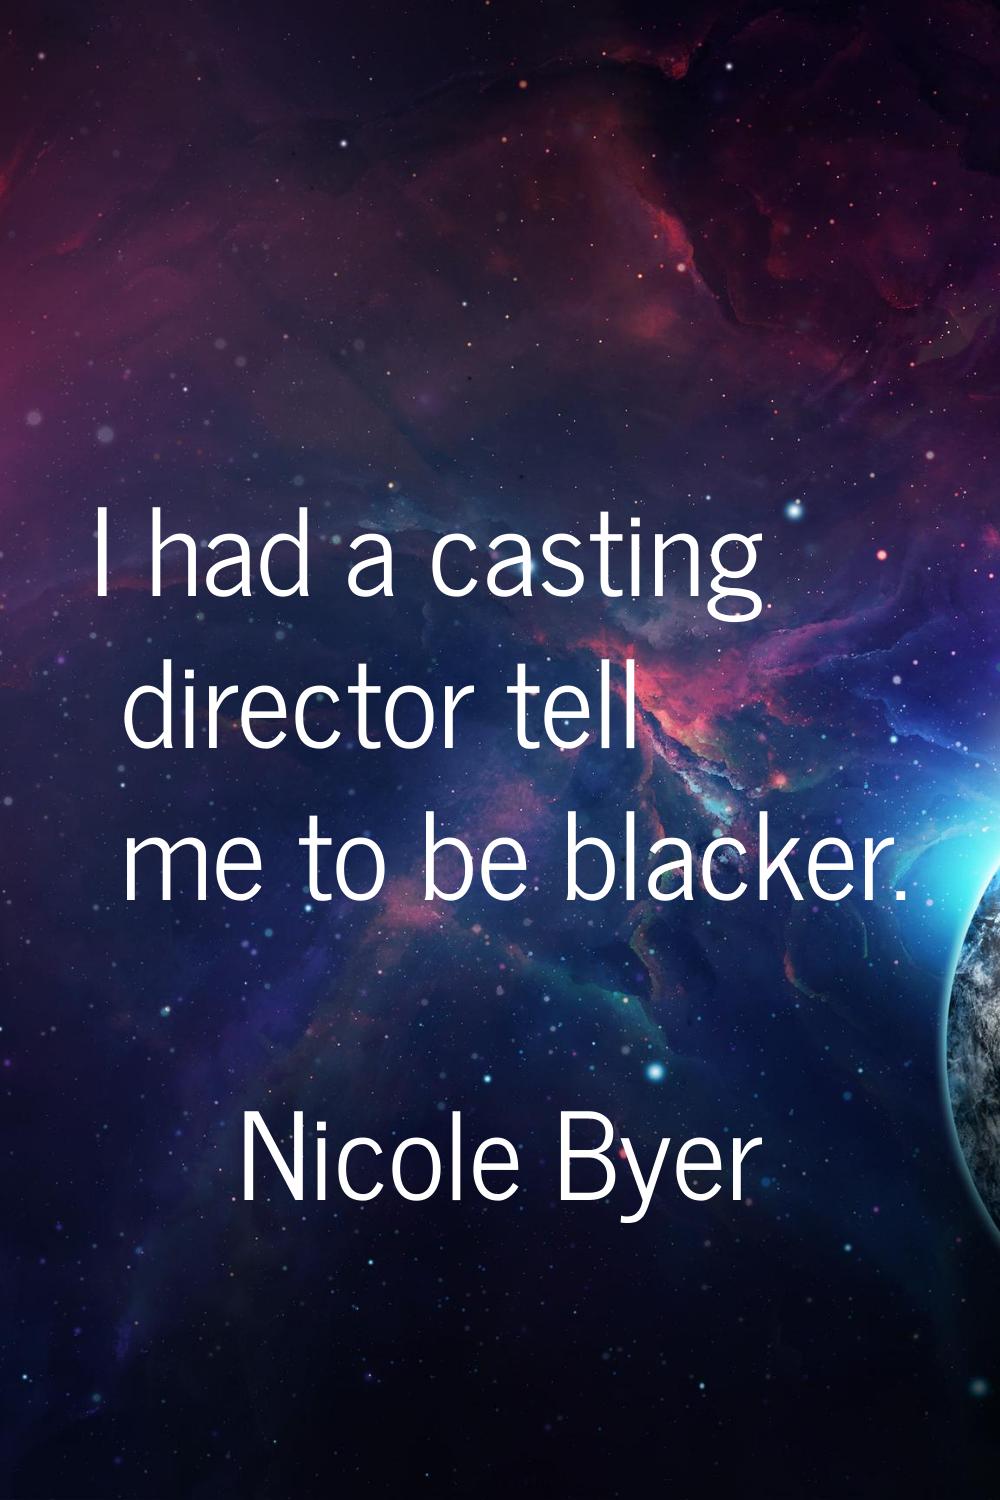 I had a casting director tell me to be blacker.